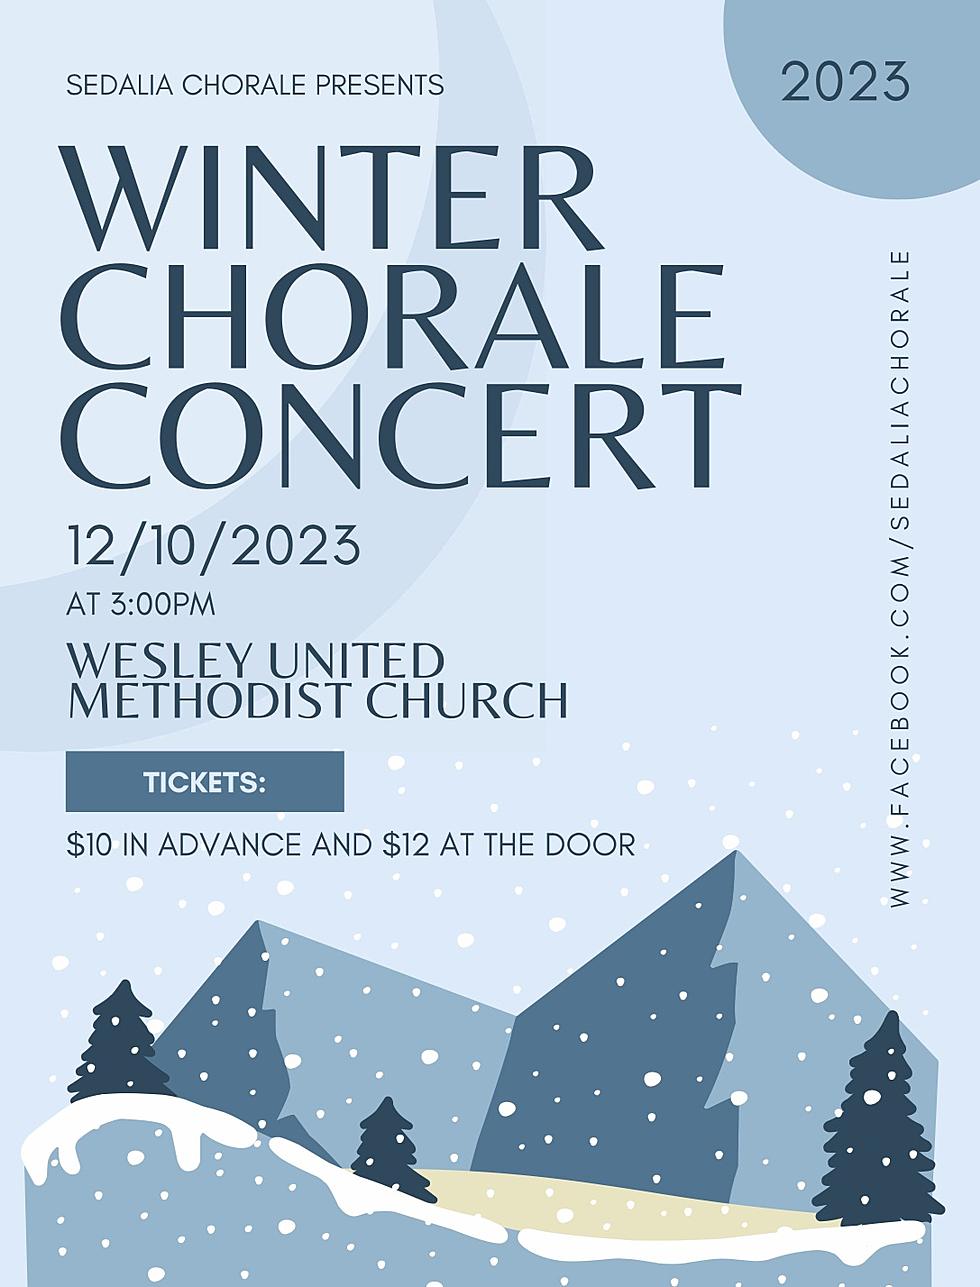 Sedalia Chorale Winter Concert is Sunday Afternoon at 3